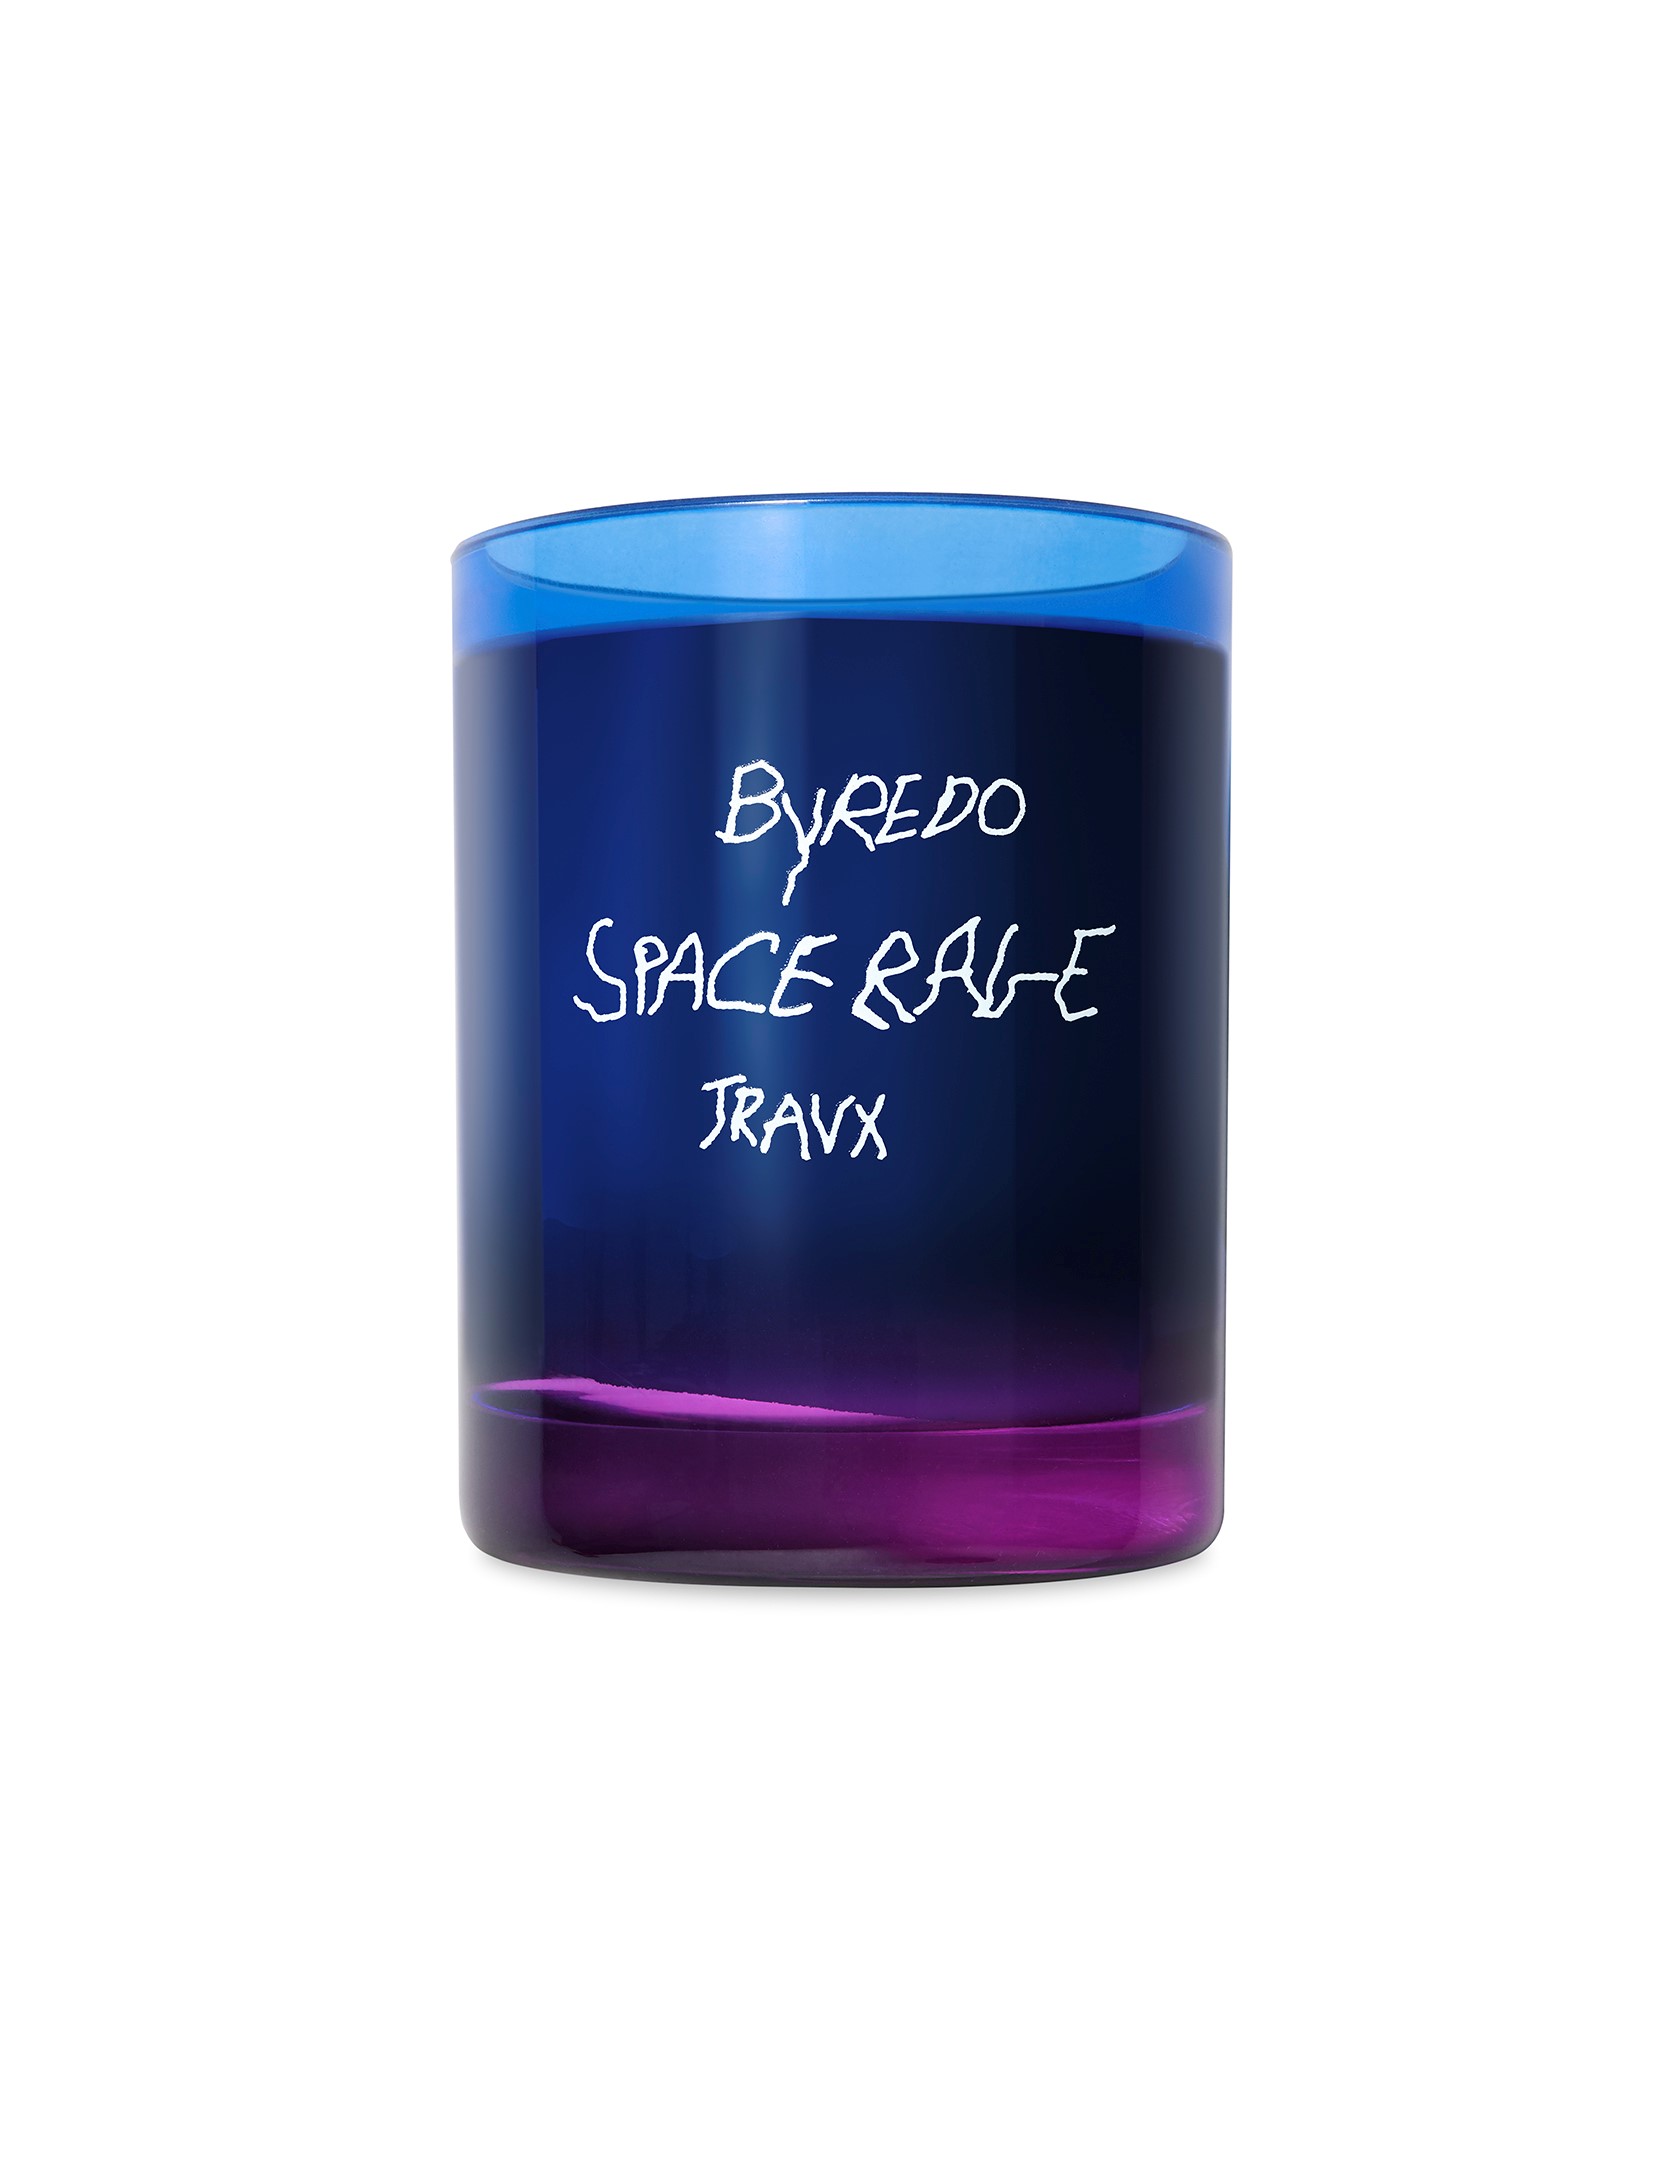 Travis Scott has his own Byredo fragrance and it smells like space 